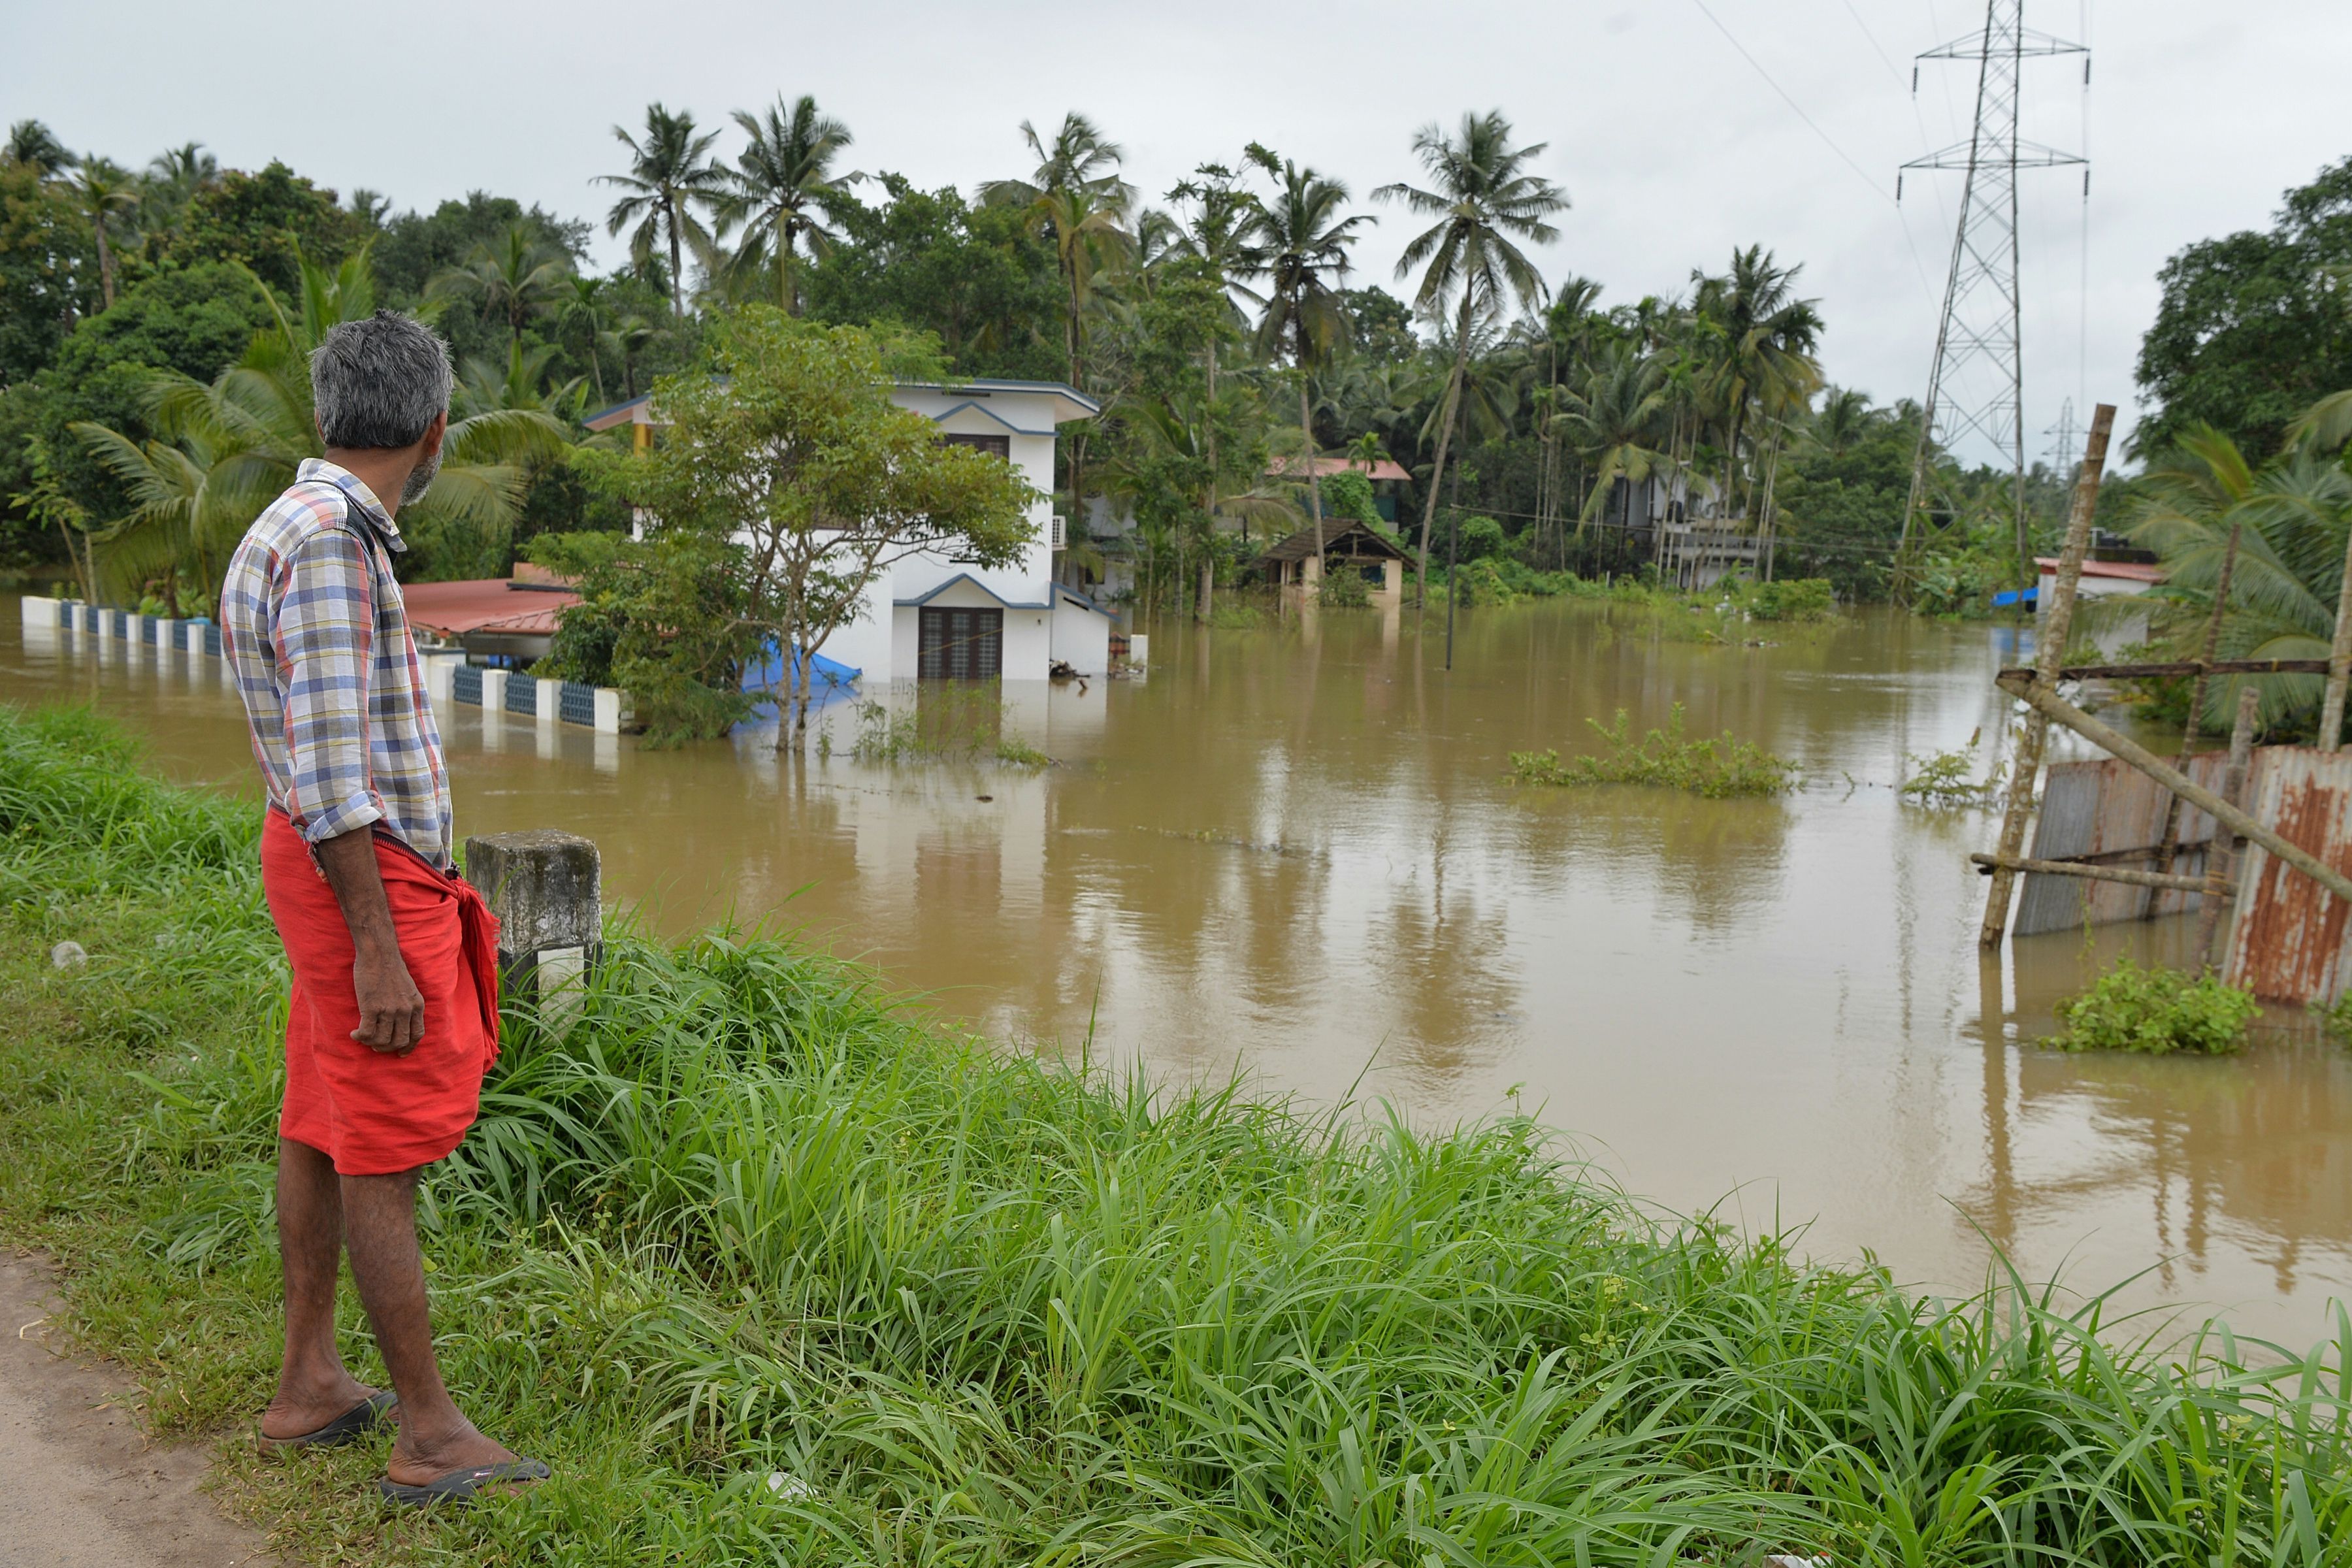 An Indian man watches marooned houses on the outskirts of Kozhikode district, in the south Indian state of Kerala. Photo: Manjunath Kiran/AFP/Getty Images